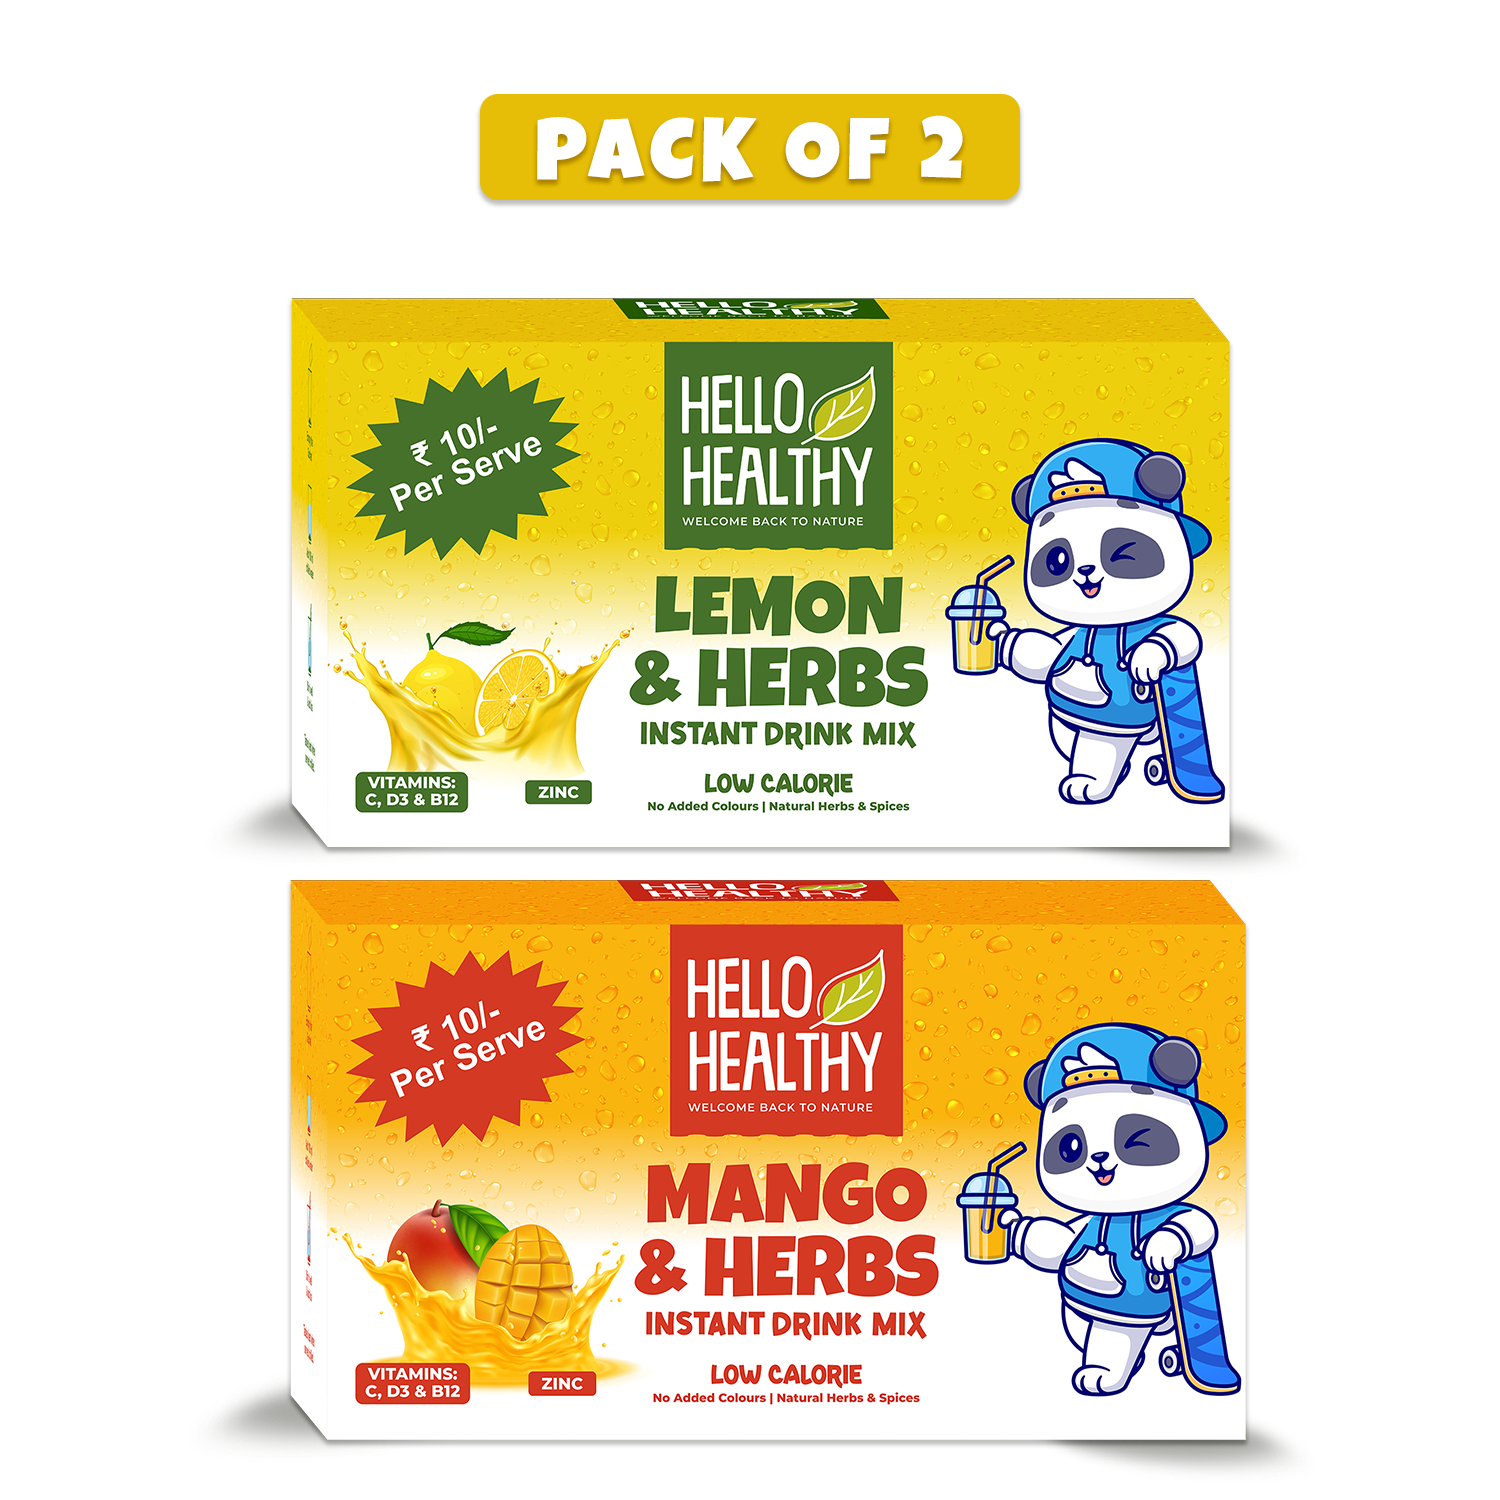 Hello Healthy Mango Herbs & Lemon Herbs Mix Instant Drink Pack of 2 Set (40 Sachets) Nutrition Drink